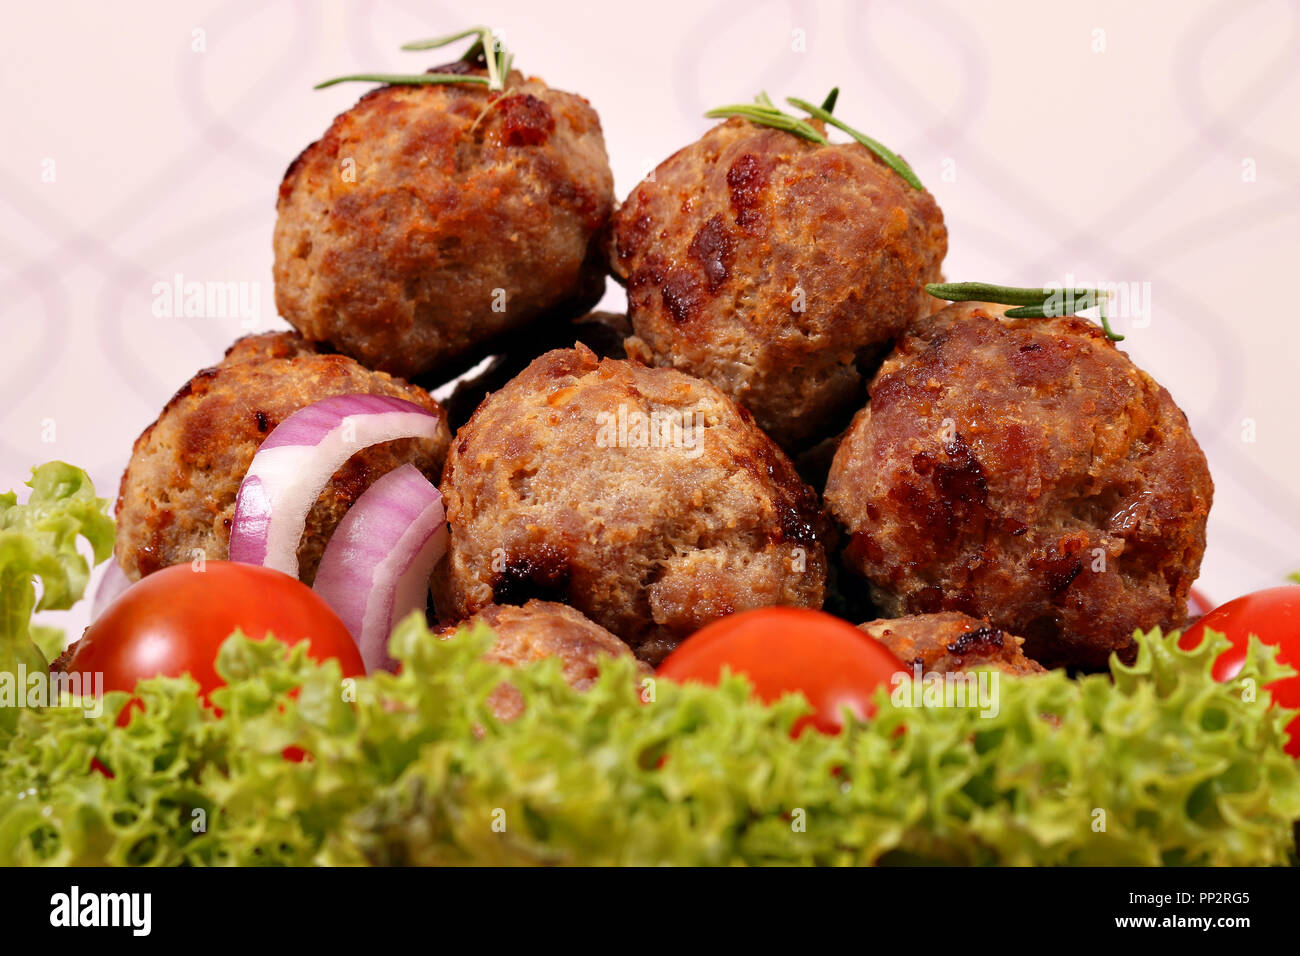 meatballs with tomatoes and salad homemade food Stock Photo